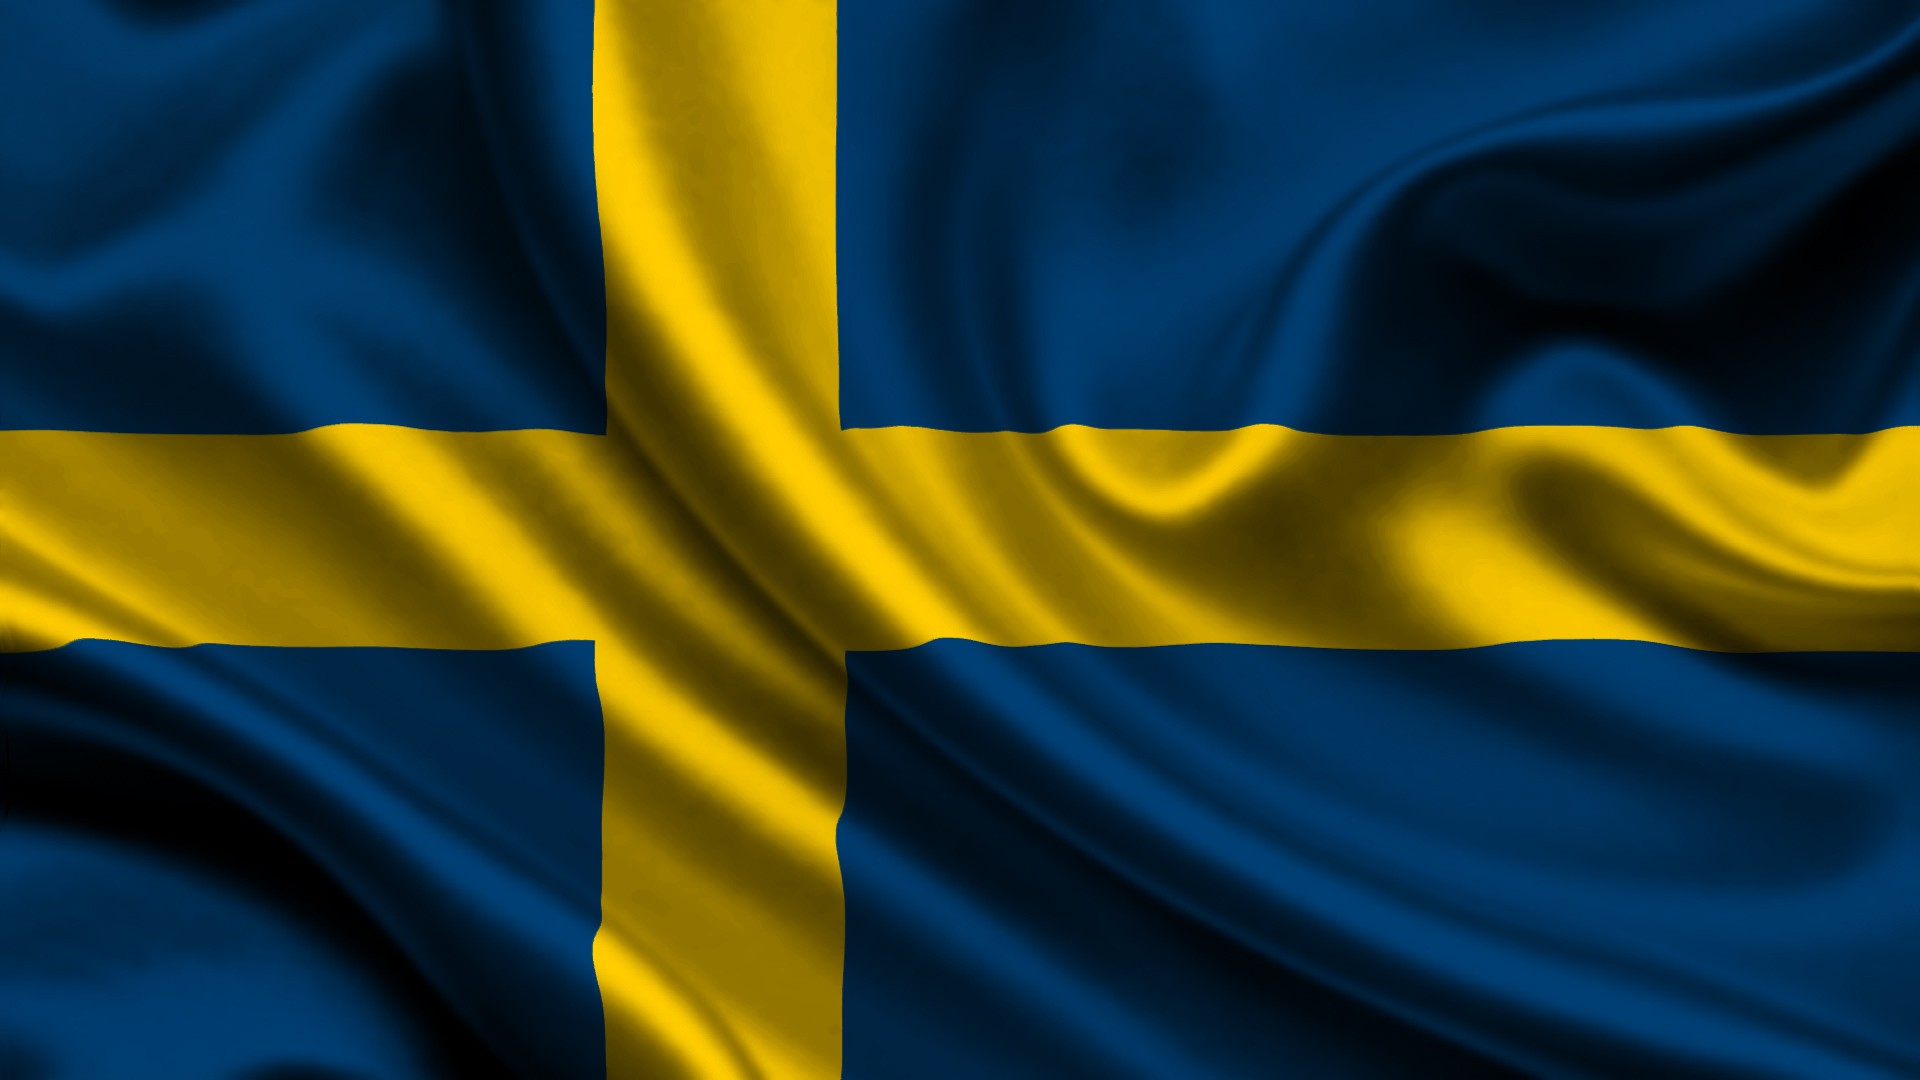 General 1920x1080 Sweden flag blue yellow